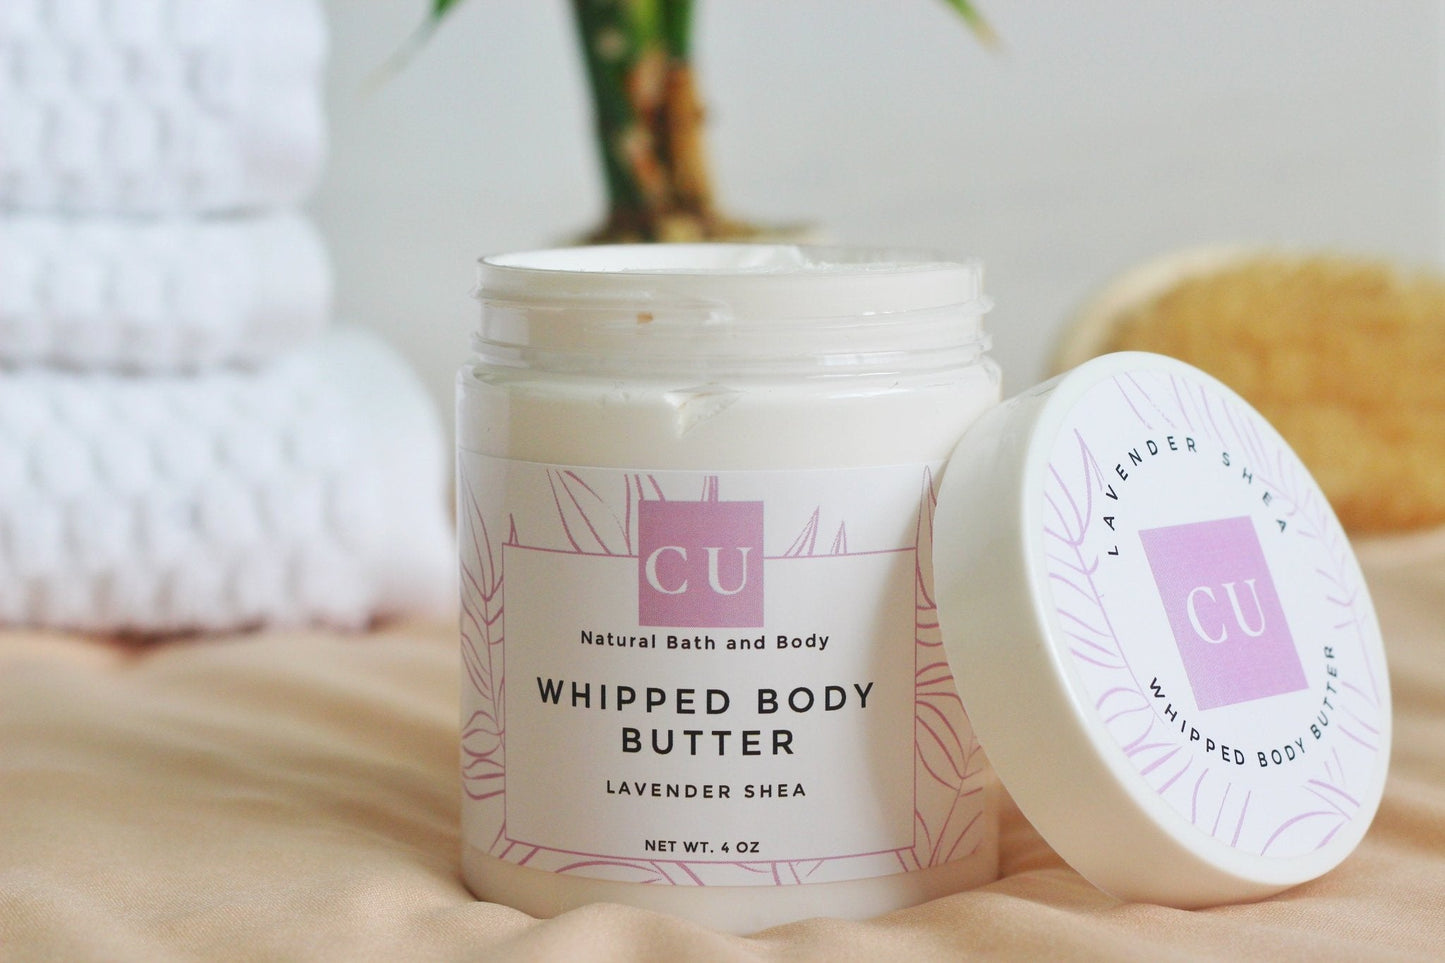 Lavender Shea whipped body butter